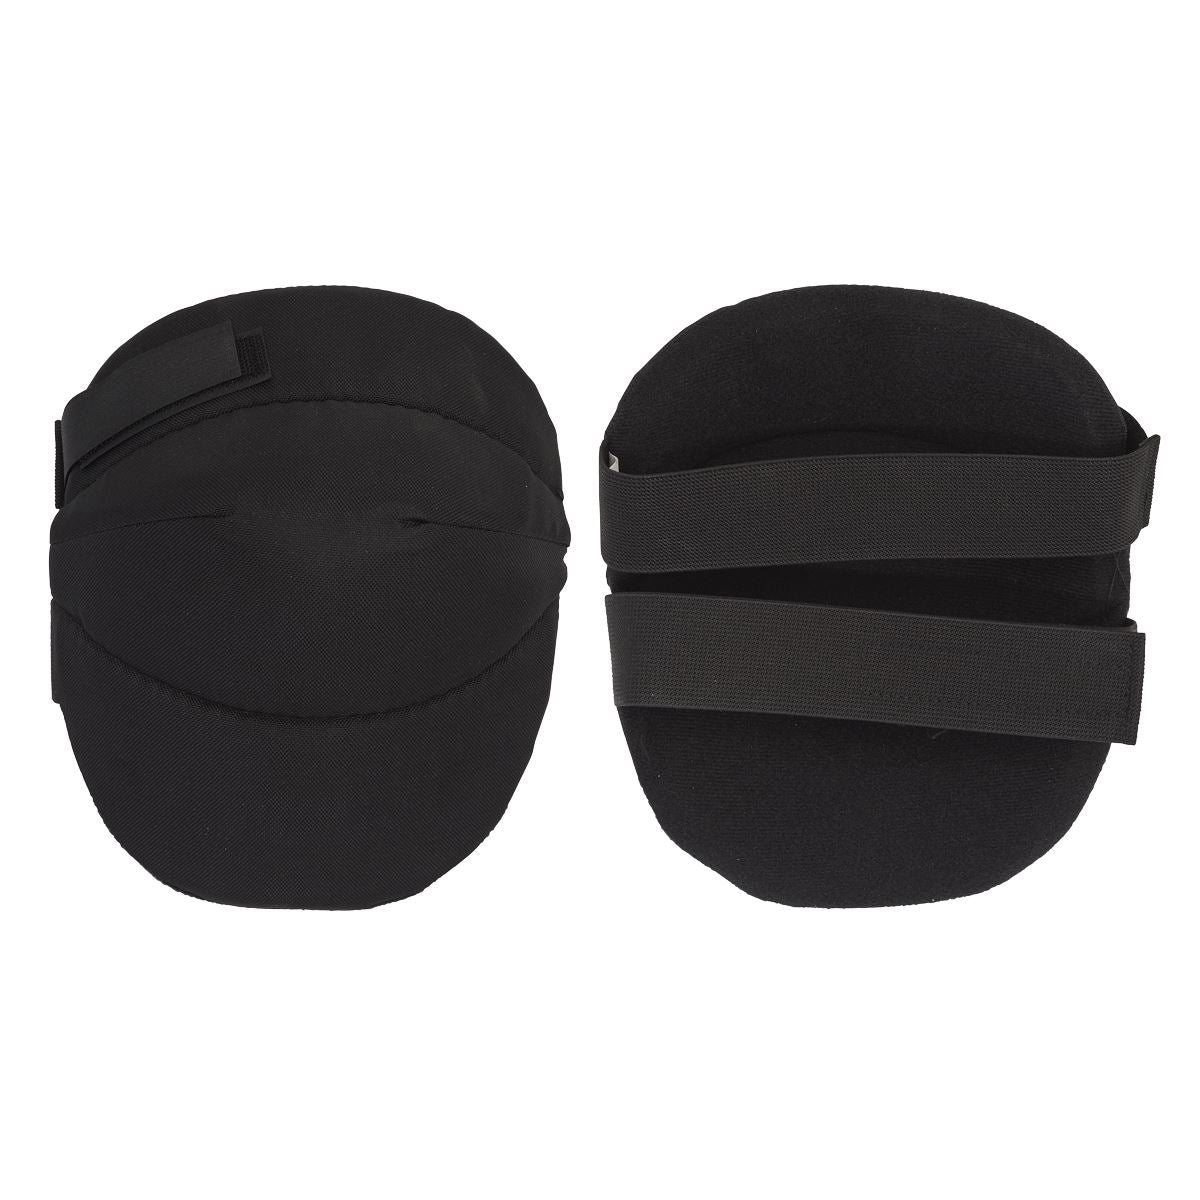 Worksafe by Sealey Comfort Knee Pads - Pair